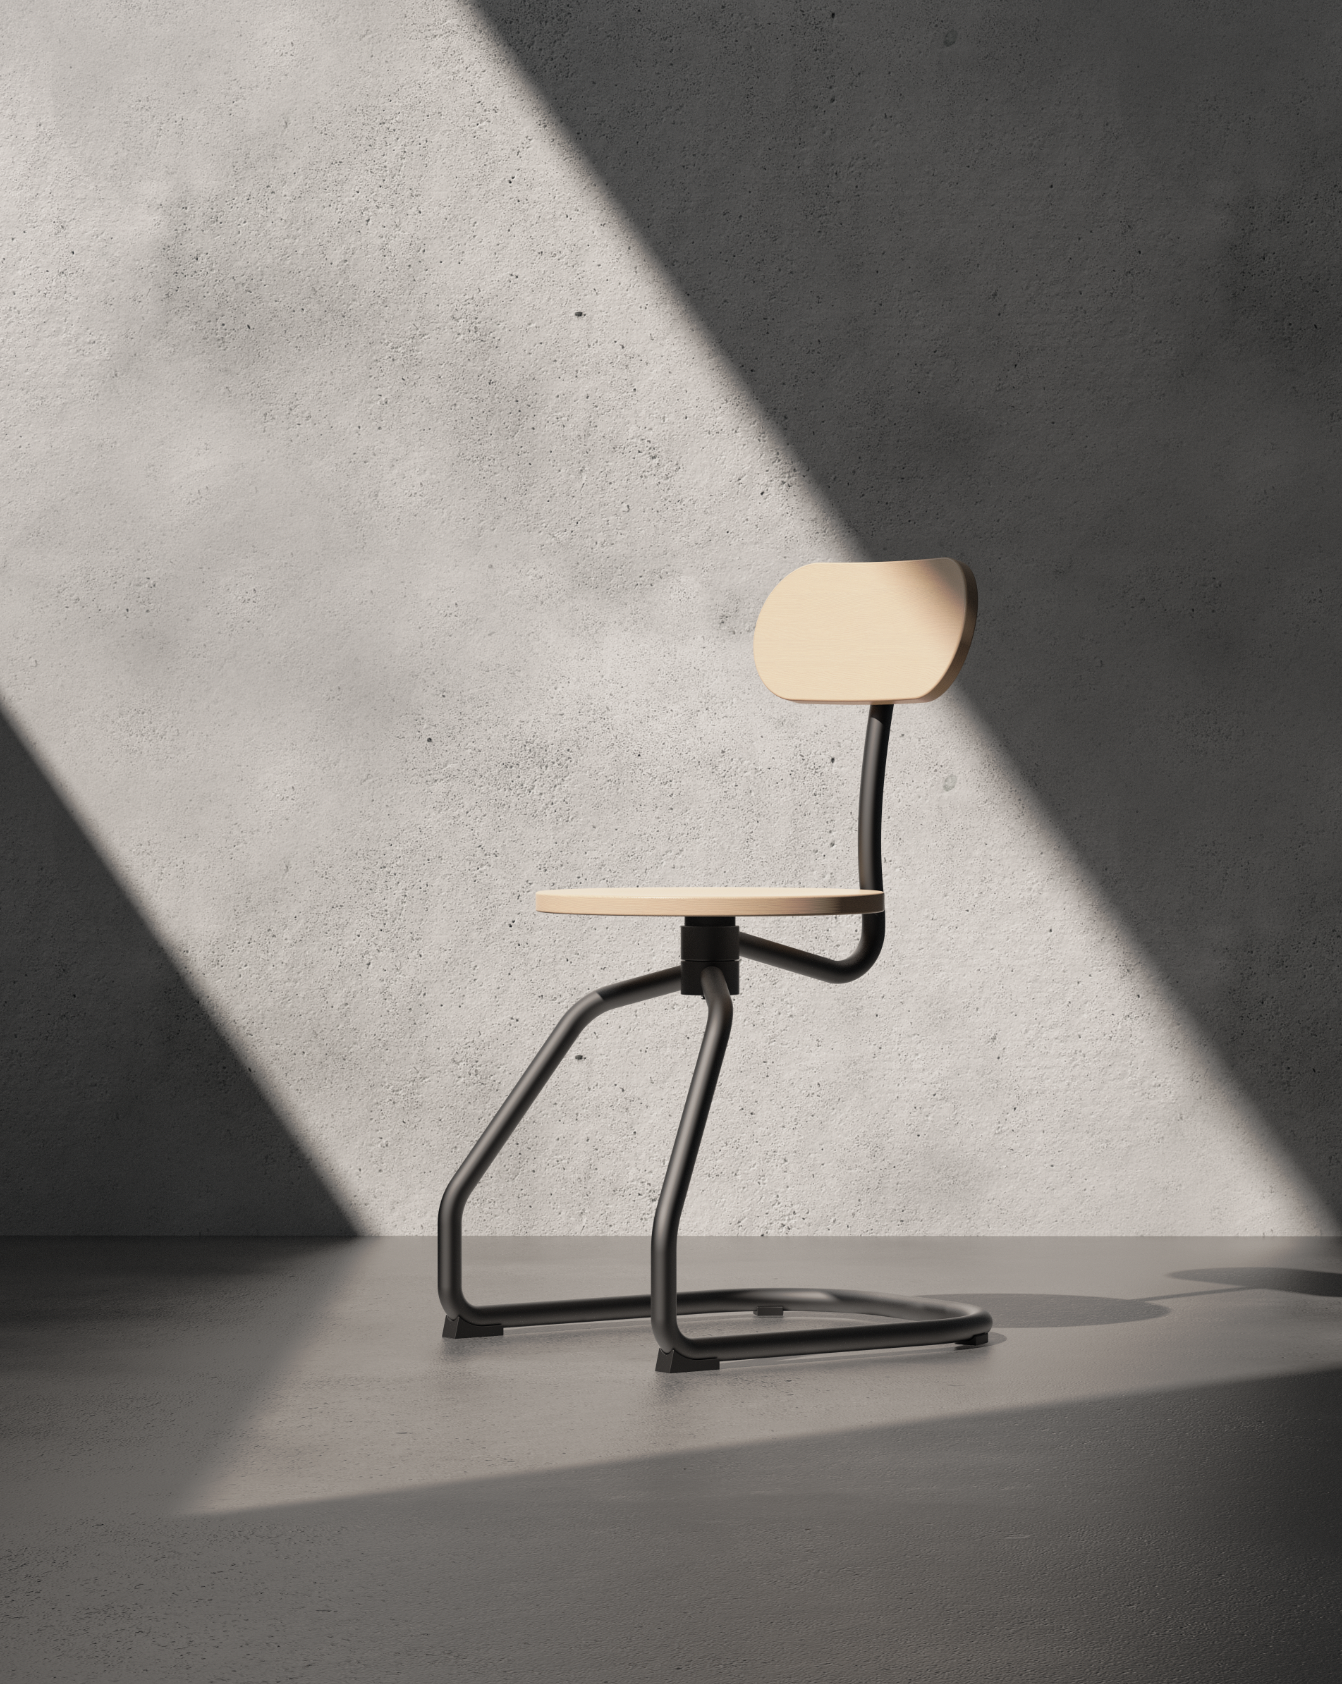 chair product industrial design ecal Stéfanie Kay design active sitting wood metal back pain comfortable